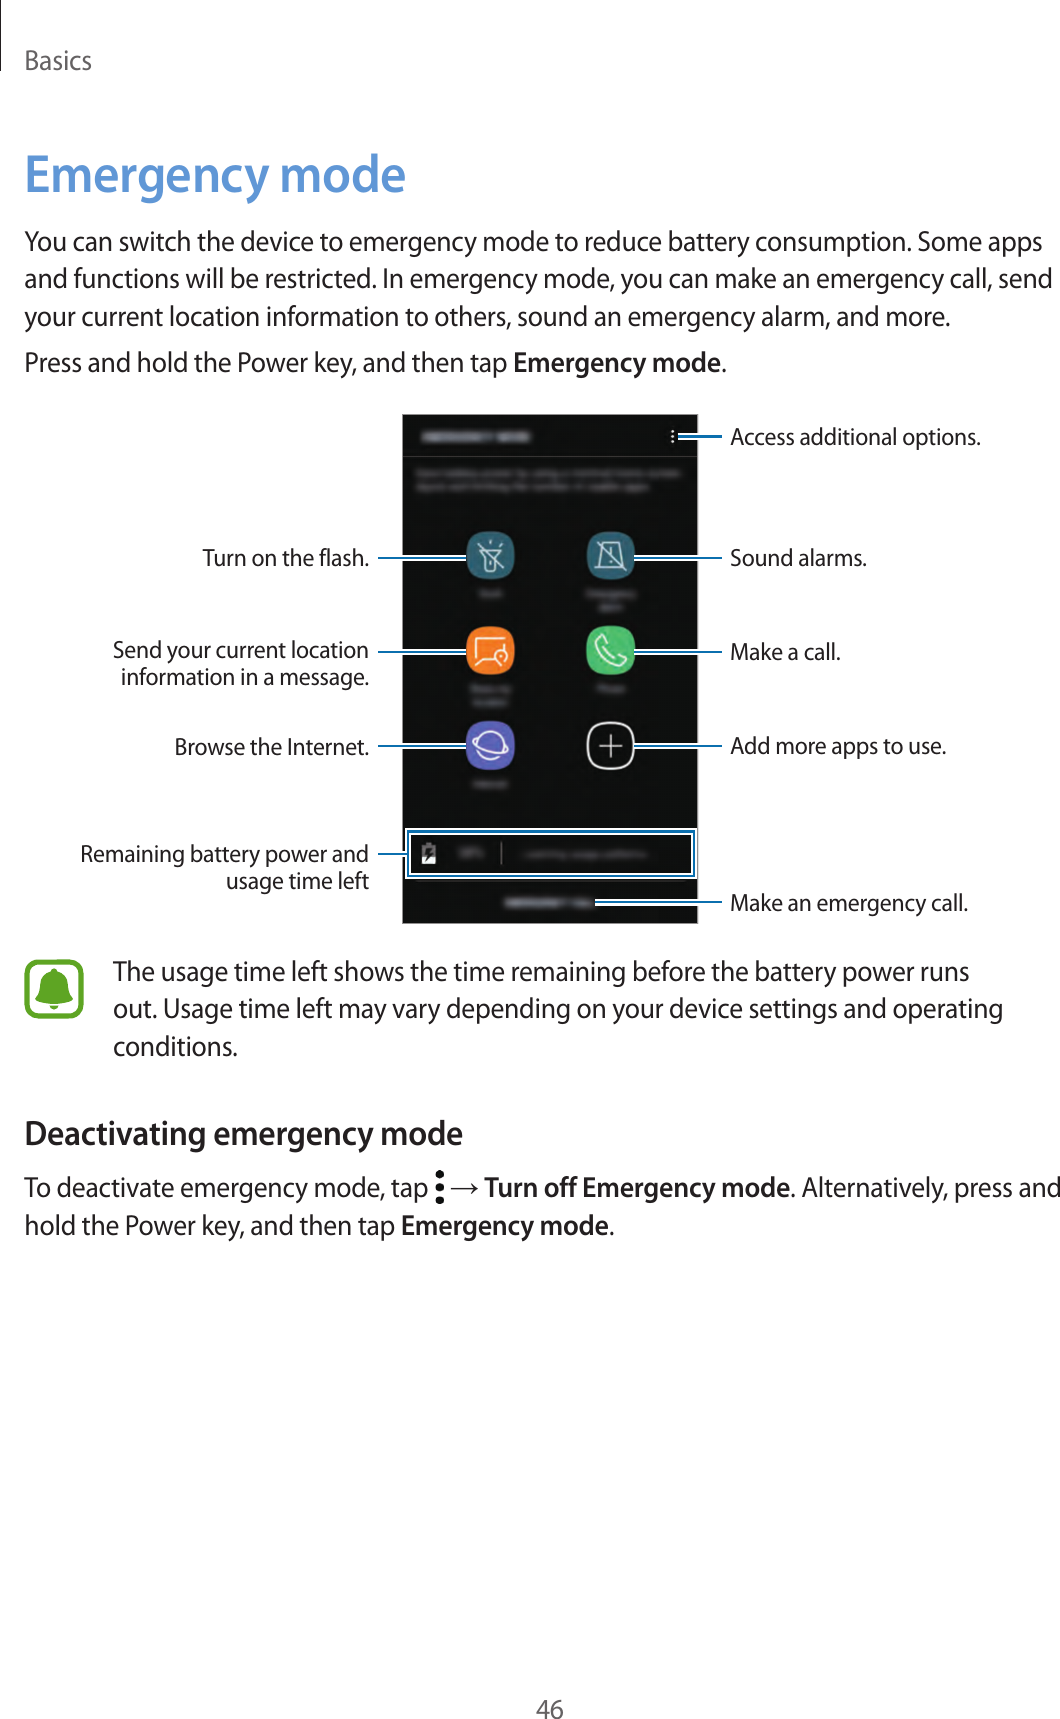 Basics46Emergency modeYou can switch the device to emergency mode to reduce battery consumption. Some apps and functions will be restricted. In emergency mode, you can make an emergency call, send your current location information to others, sound an emergency alarm, and more.Press and hold the Power key, and then tap Emergency mode.Add more apps to use.Make an emergency call.Remaining battery power and usage time leftTurn on the flash.Make a call.Send your current location information in a message.Browse the Internet.Access additional options.Sound alarms.The usage time left shows the time remaining before the battery power runs out. Usage time left may vary depending on your device settings and operating conditions.Deactivating emergency modeTo deactivate emergency mode, tap   → Turn off Emergency mode. Alternatively, press and hold the Power key, and then tap Emergency mode.